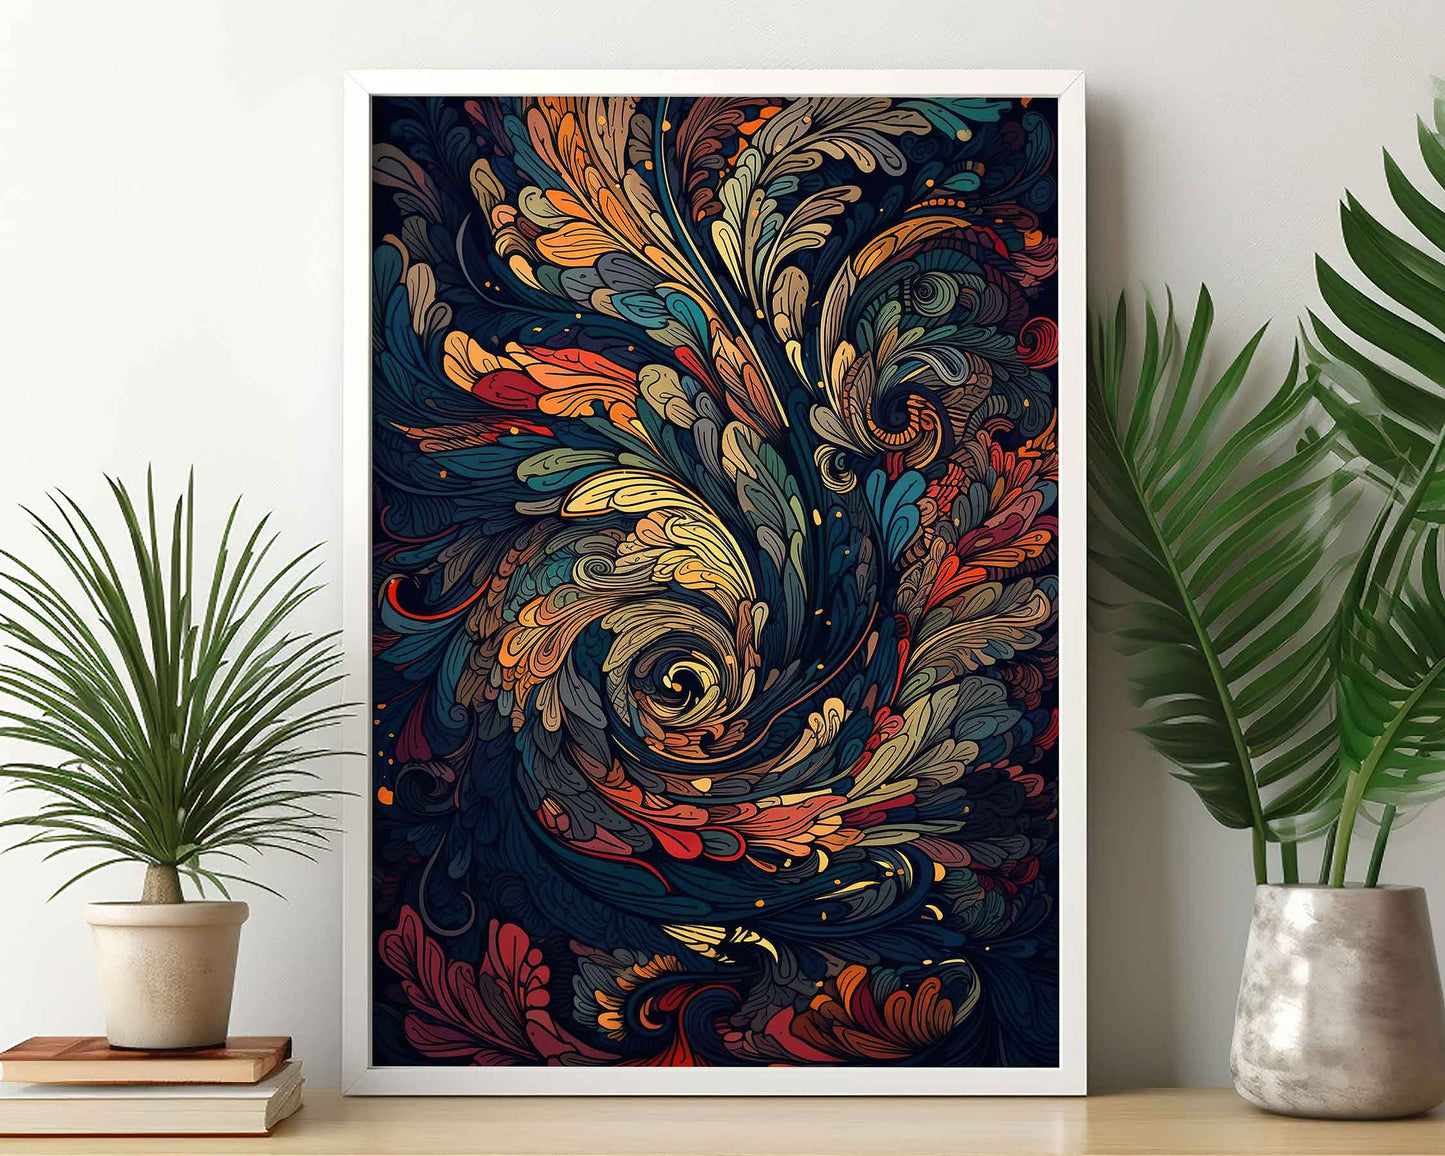 Framed Image of Vintage Psychedelic Art Nouveau Parisian 70s Wall Art Poster Print